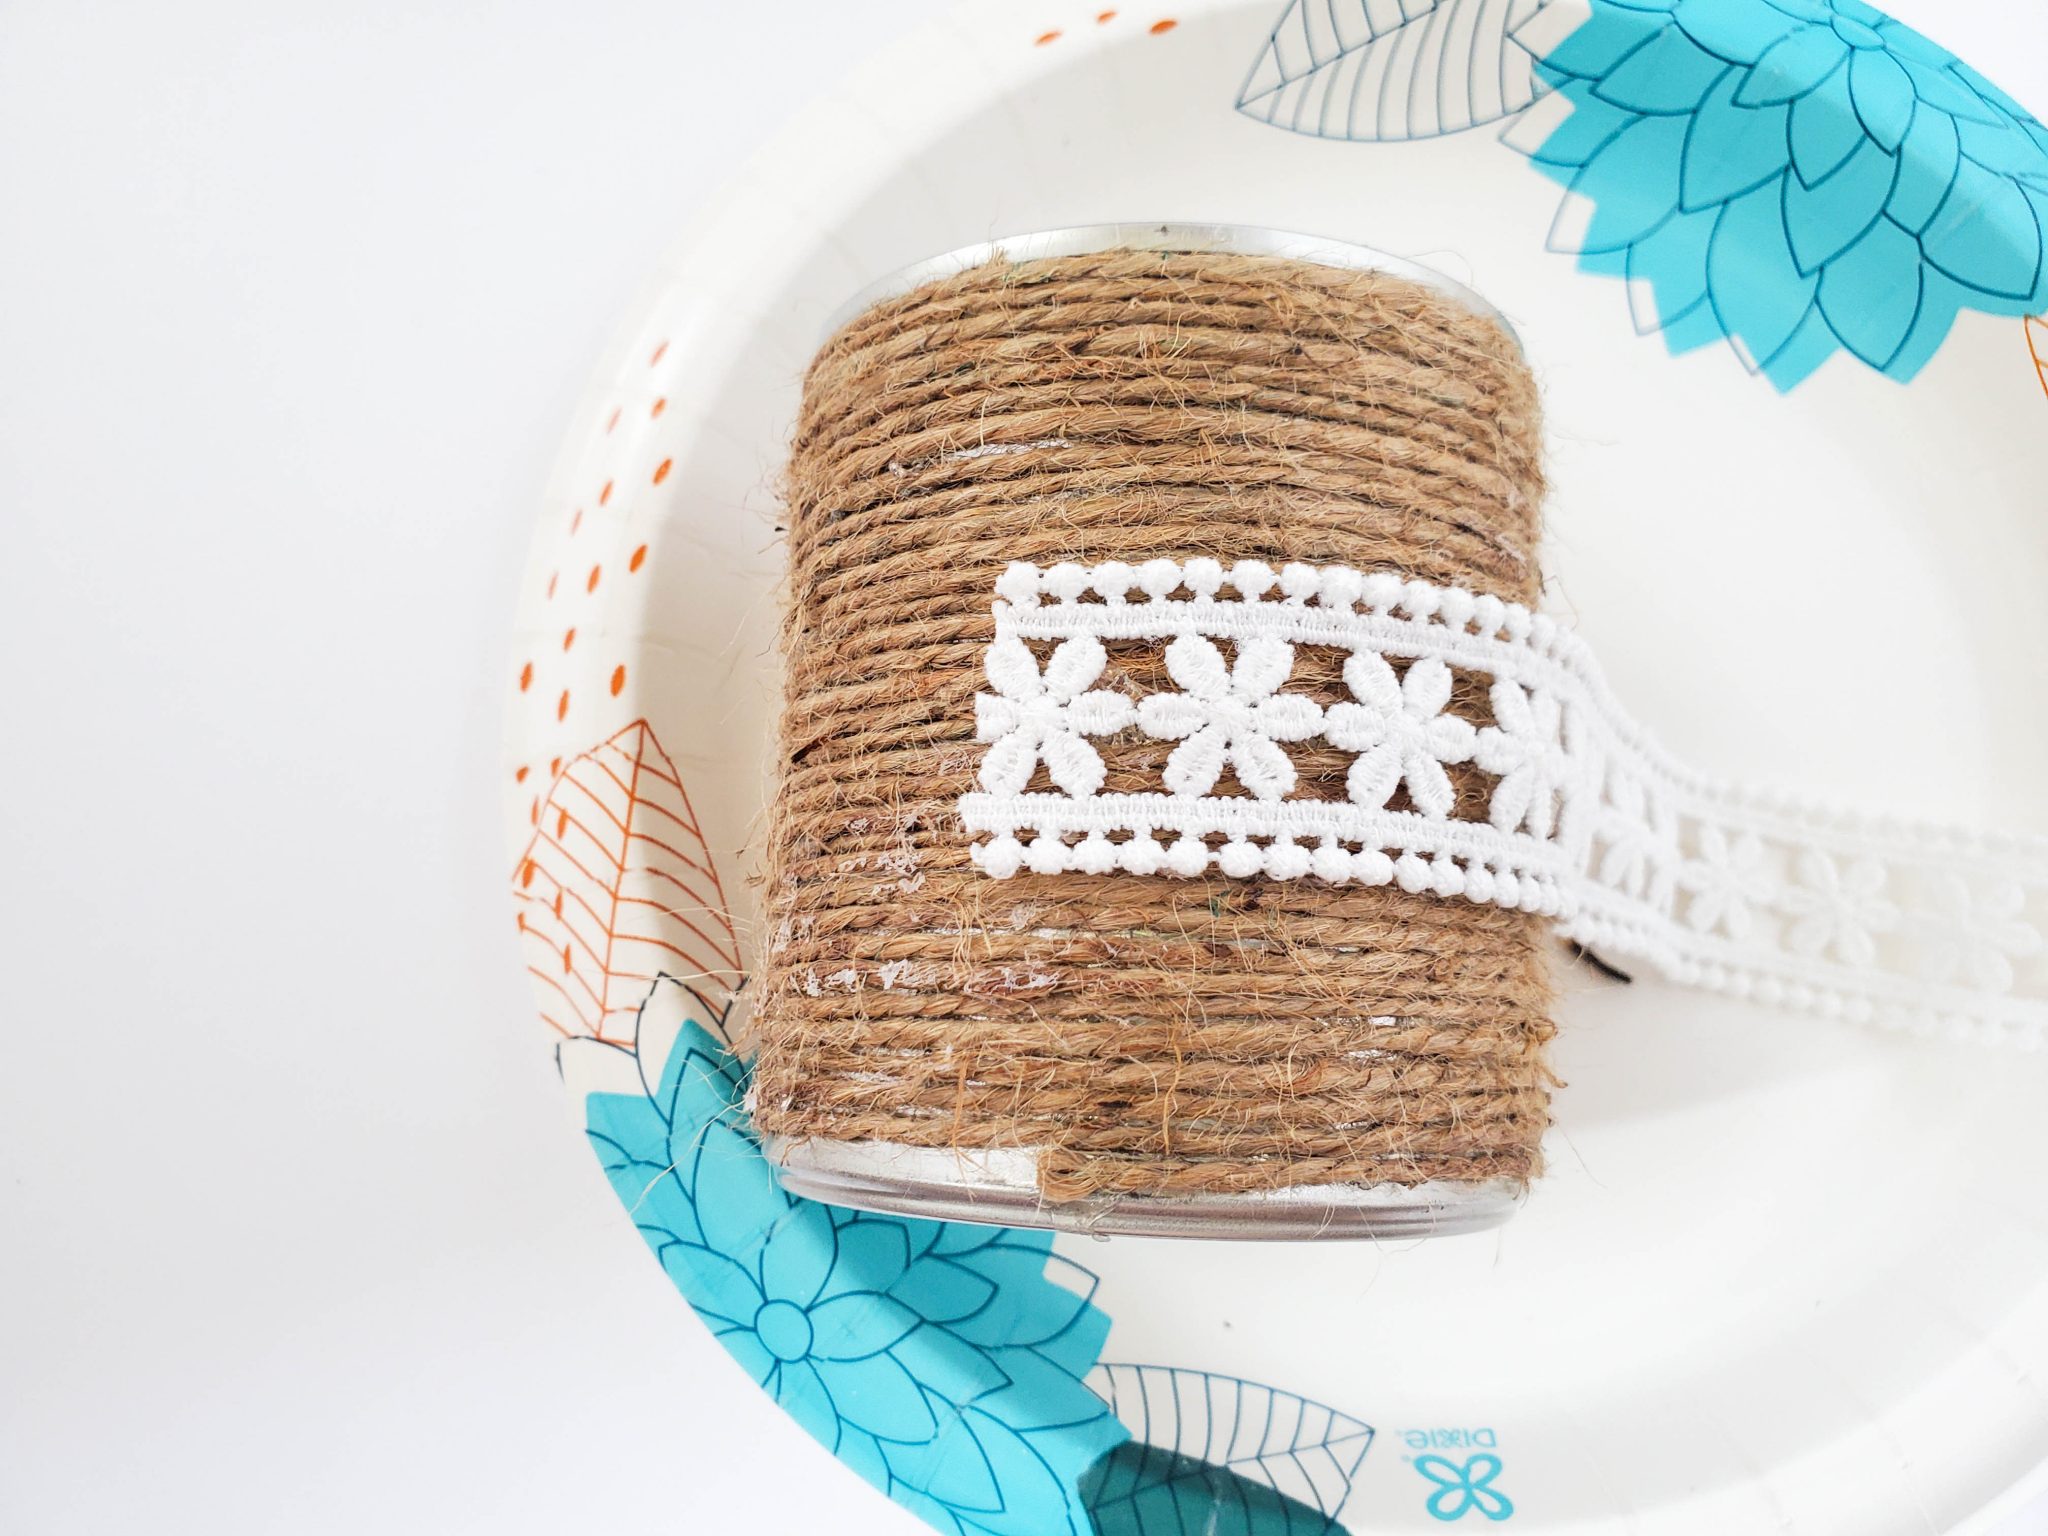 Upcycled can decorated with twine and lace